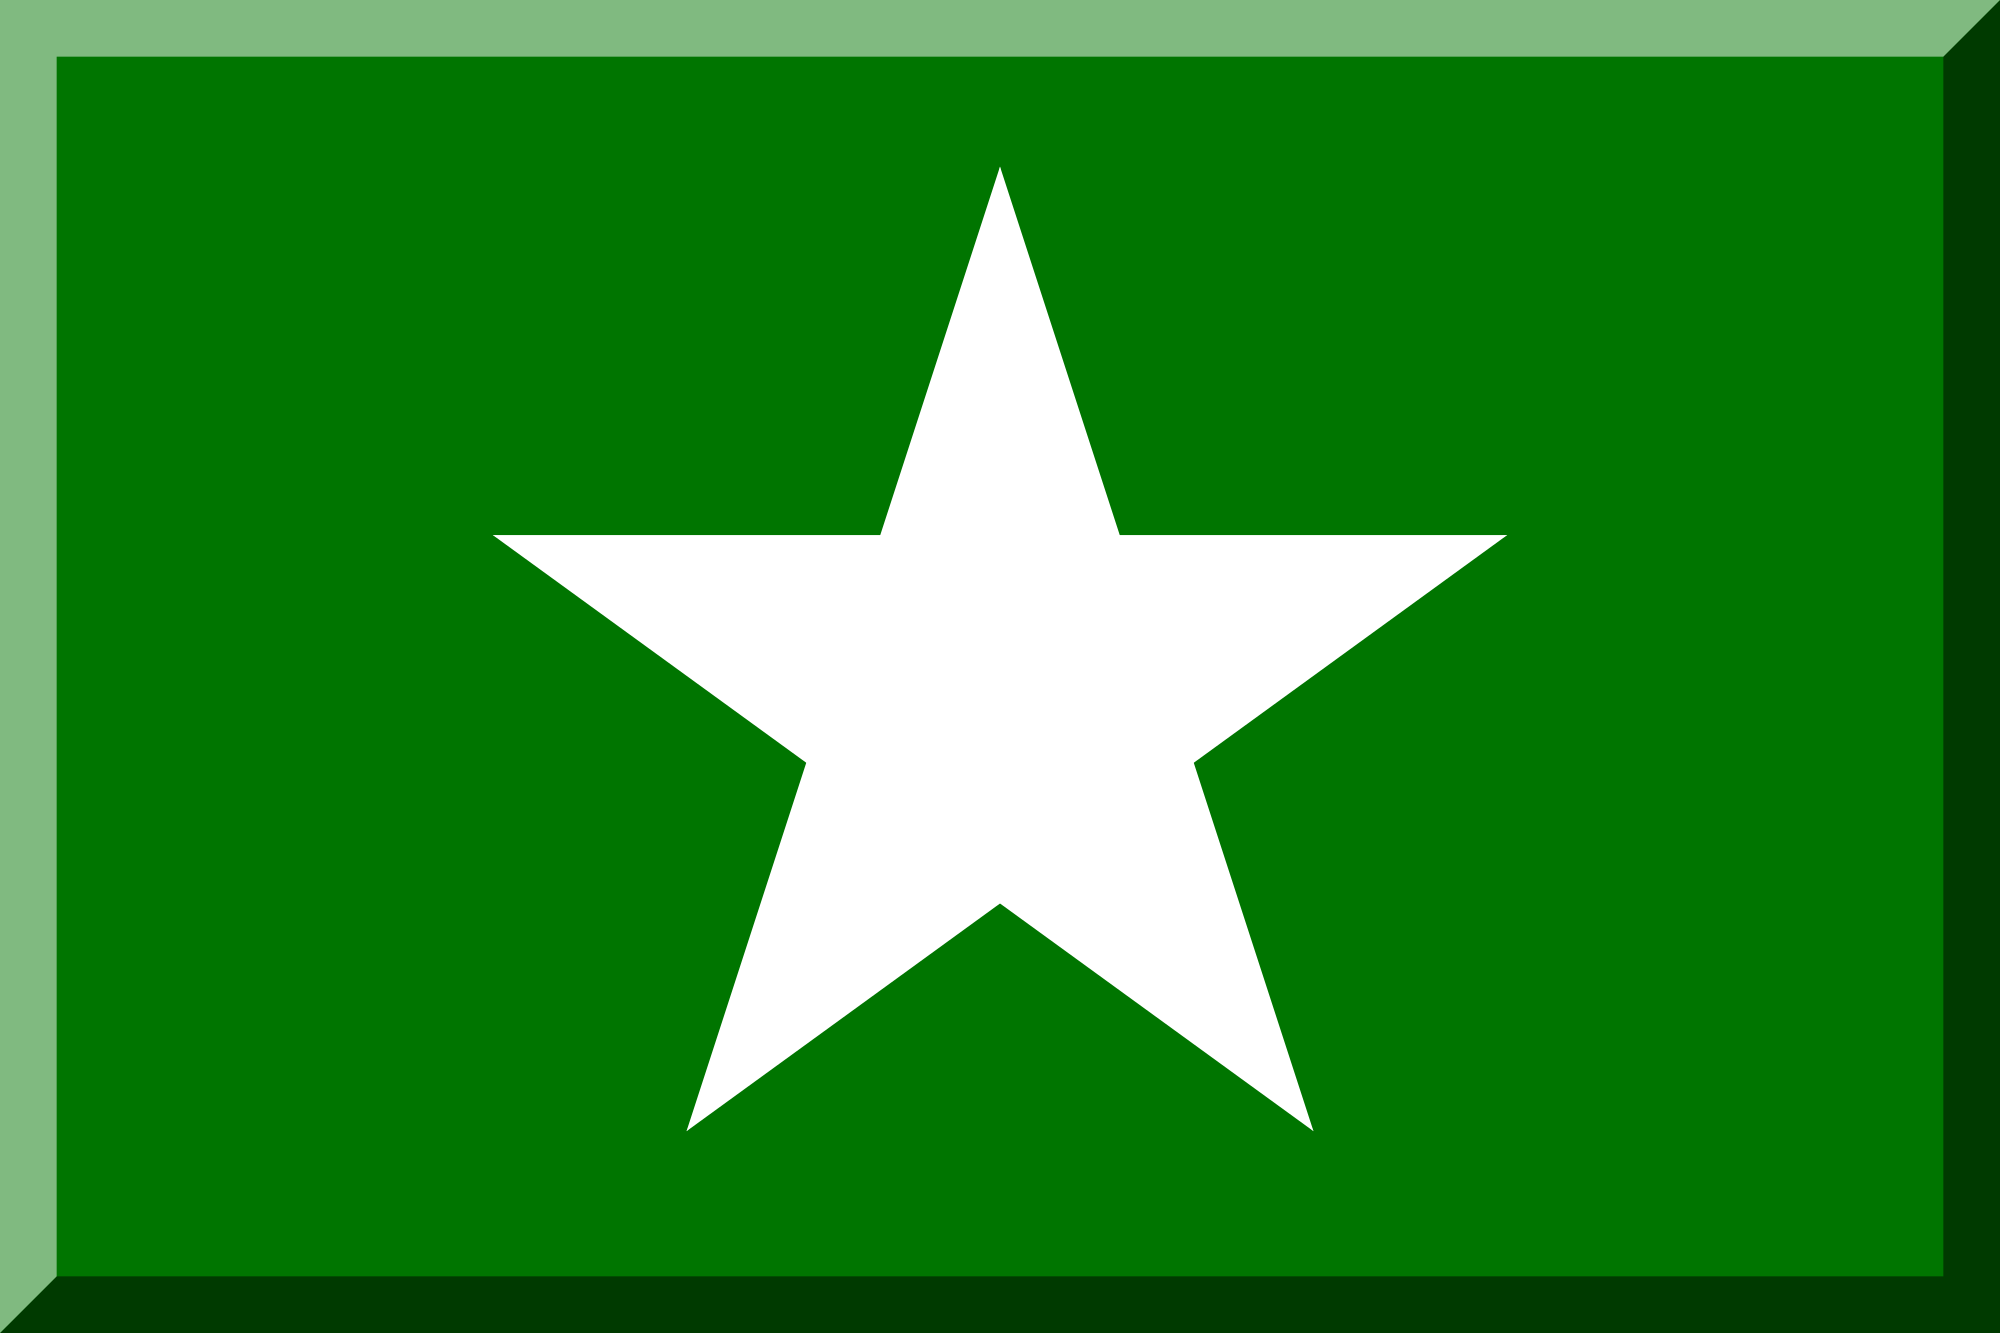 Blue Green with White Star Logo - File:Green rectangle with white star.svg - Wikimedia Commons